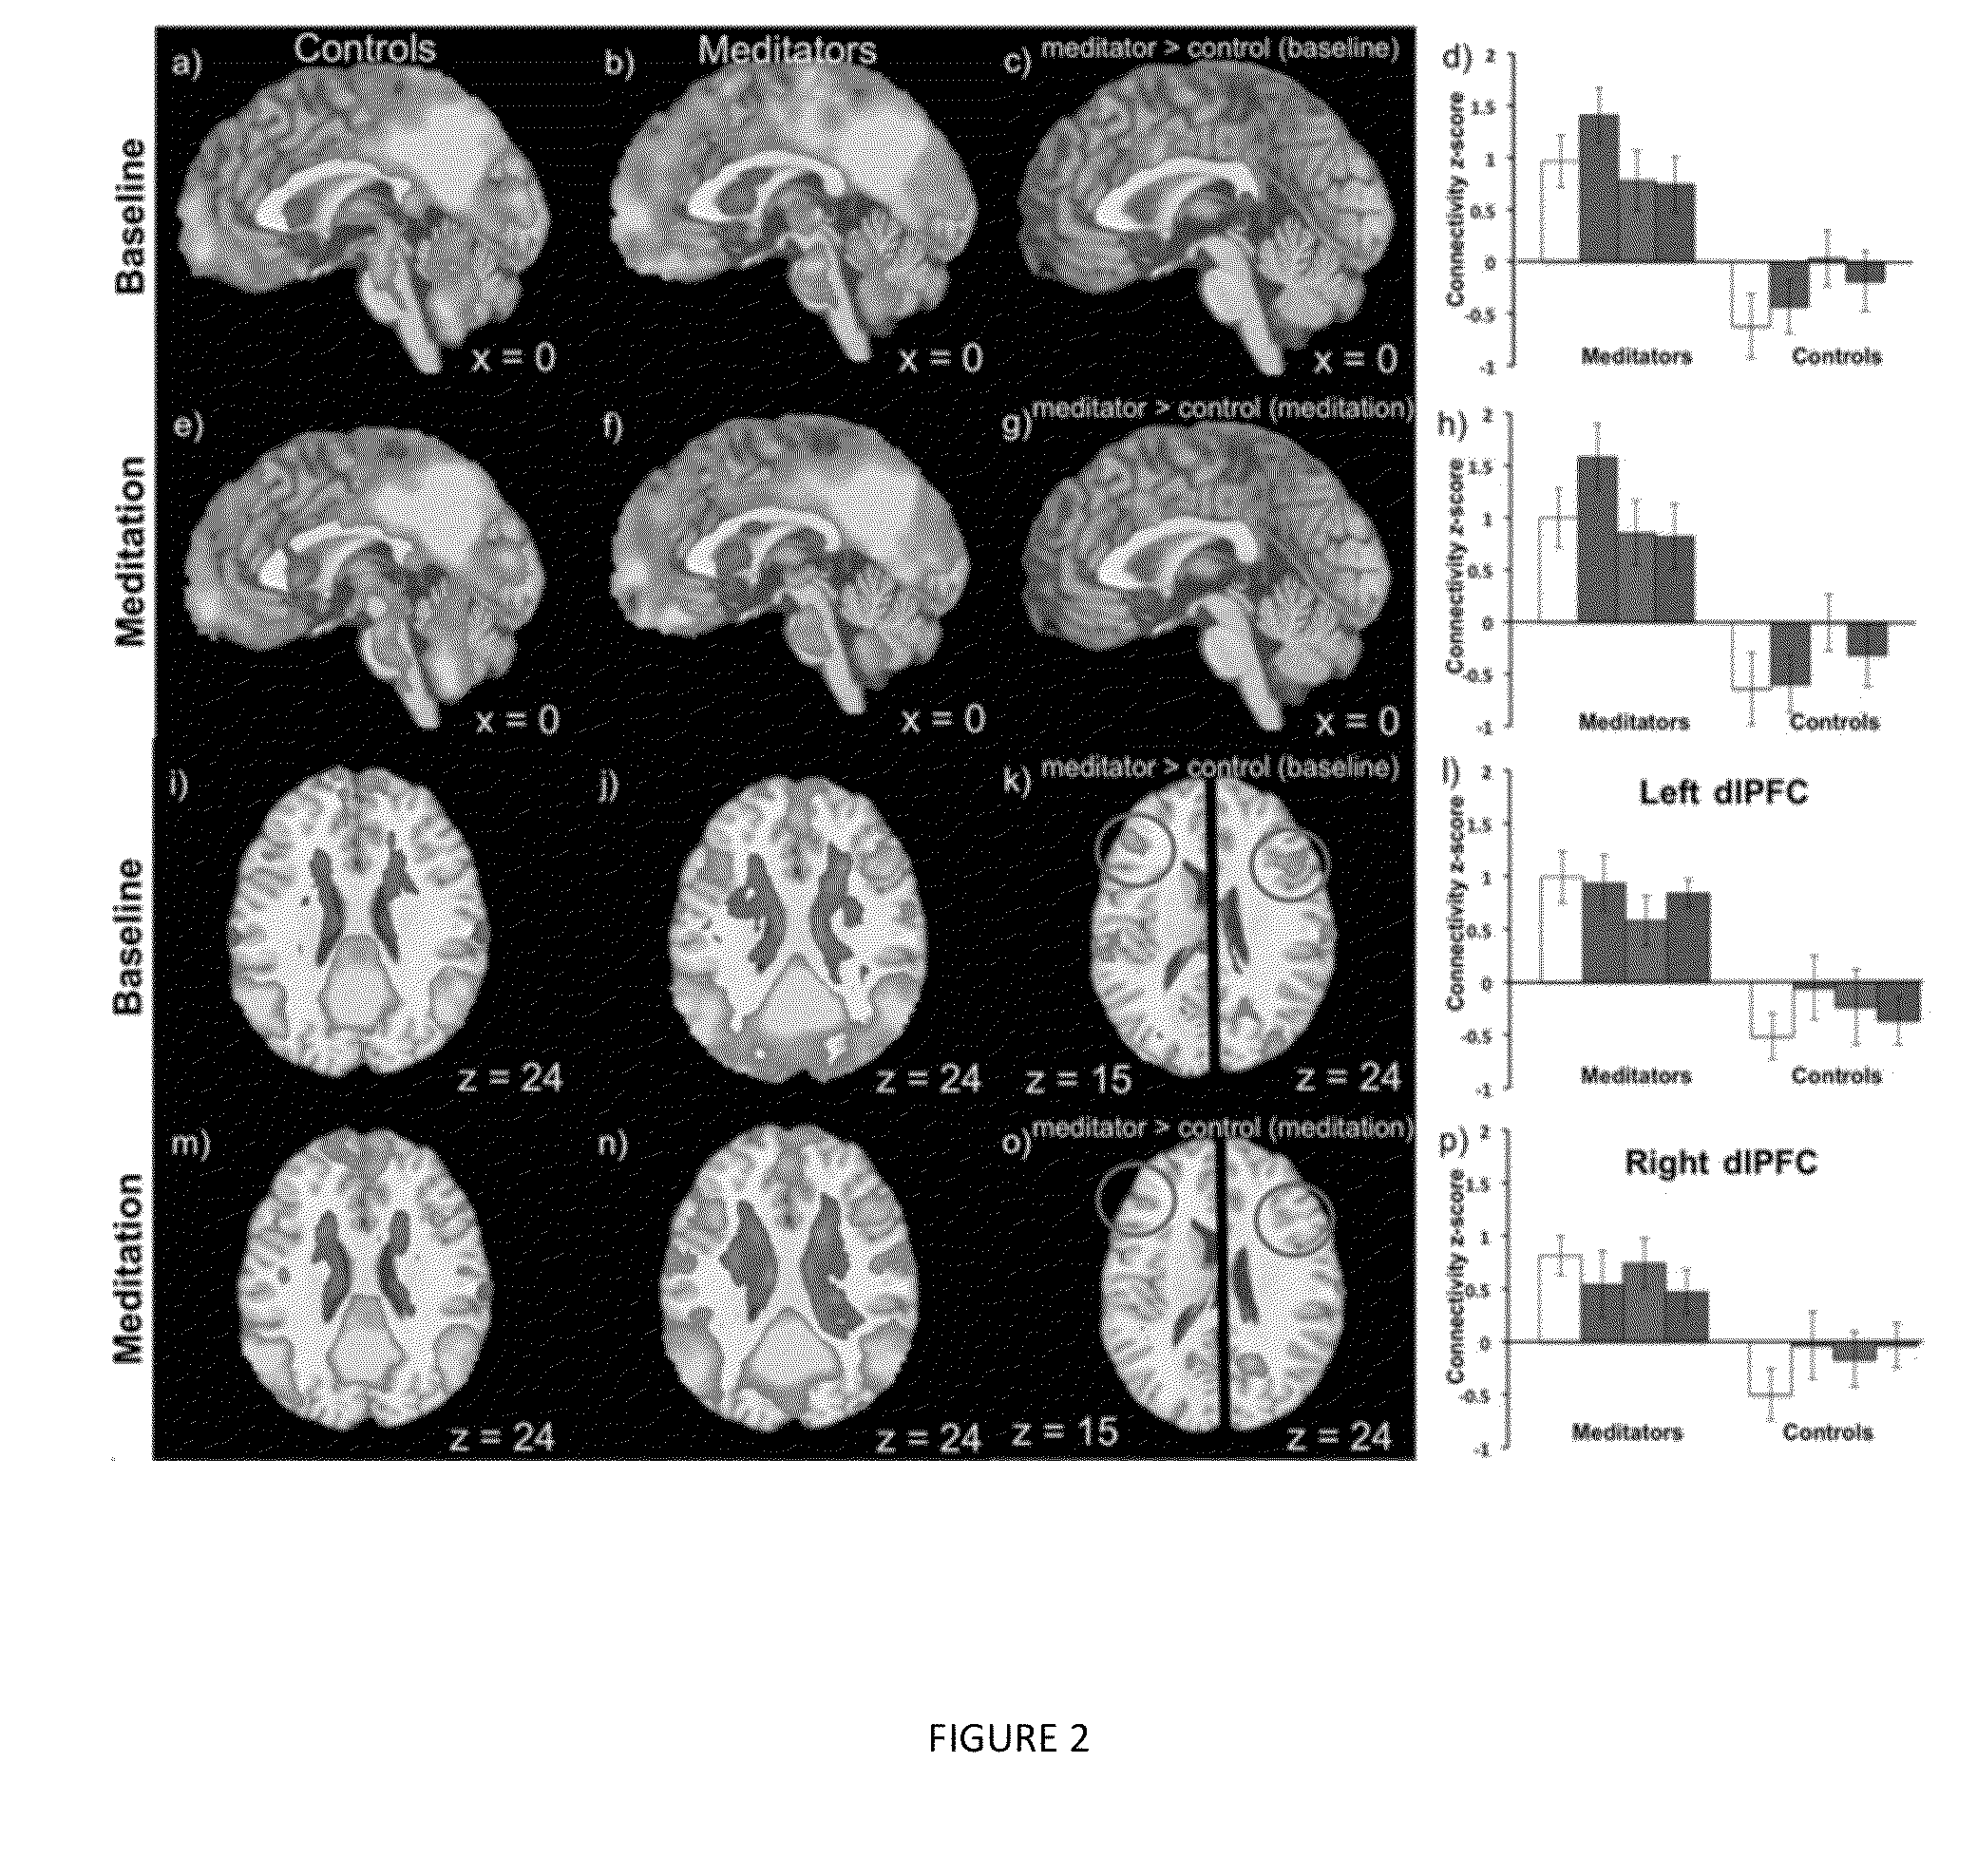 System and Method for Regulating Brain Activity